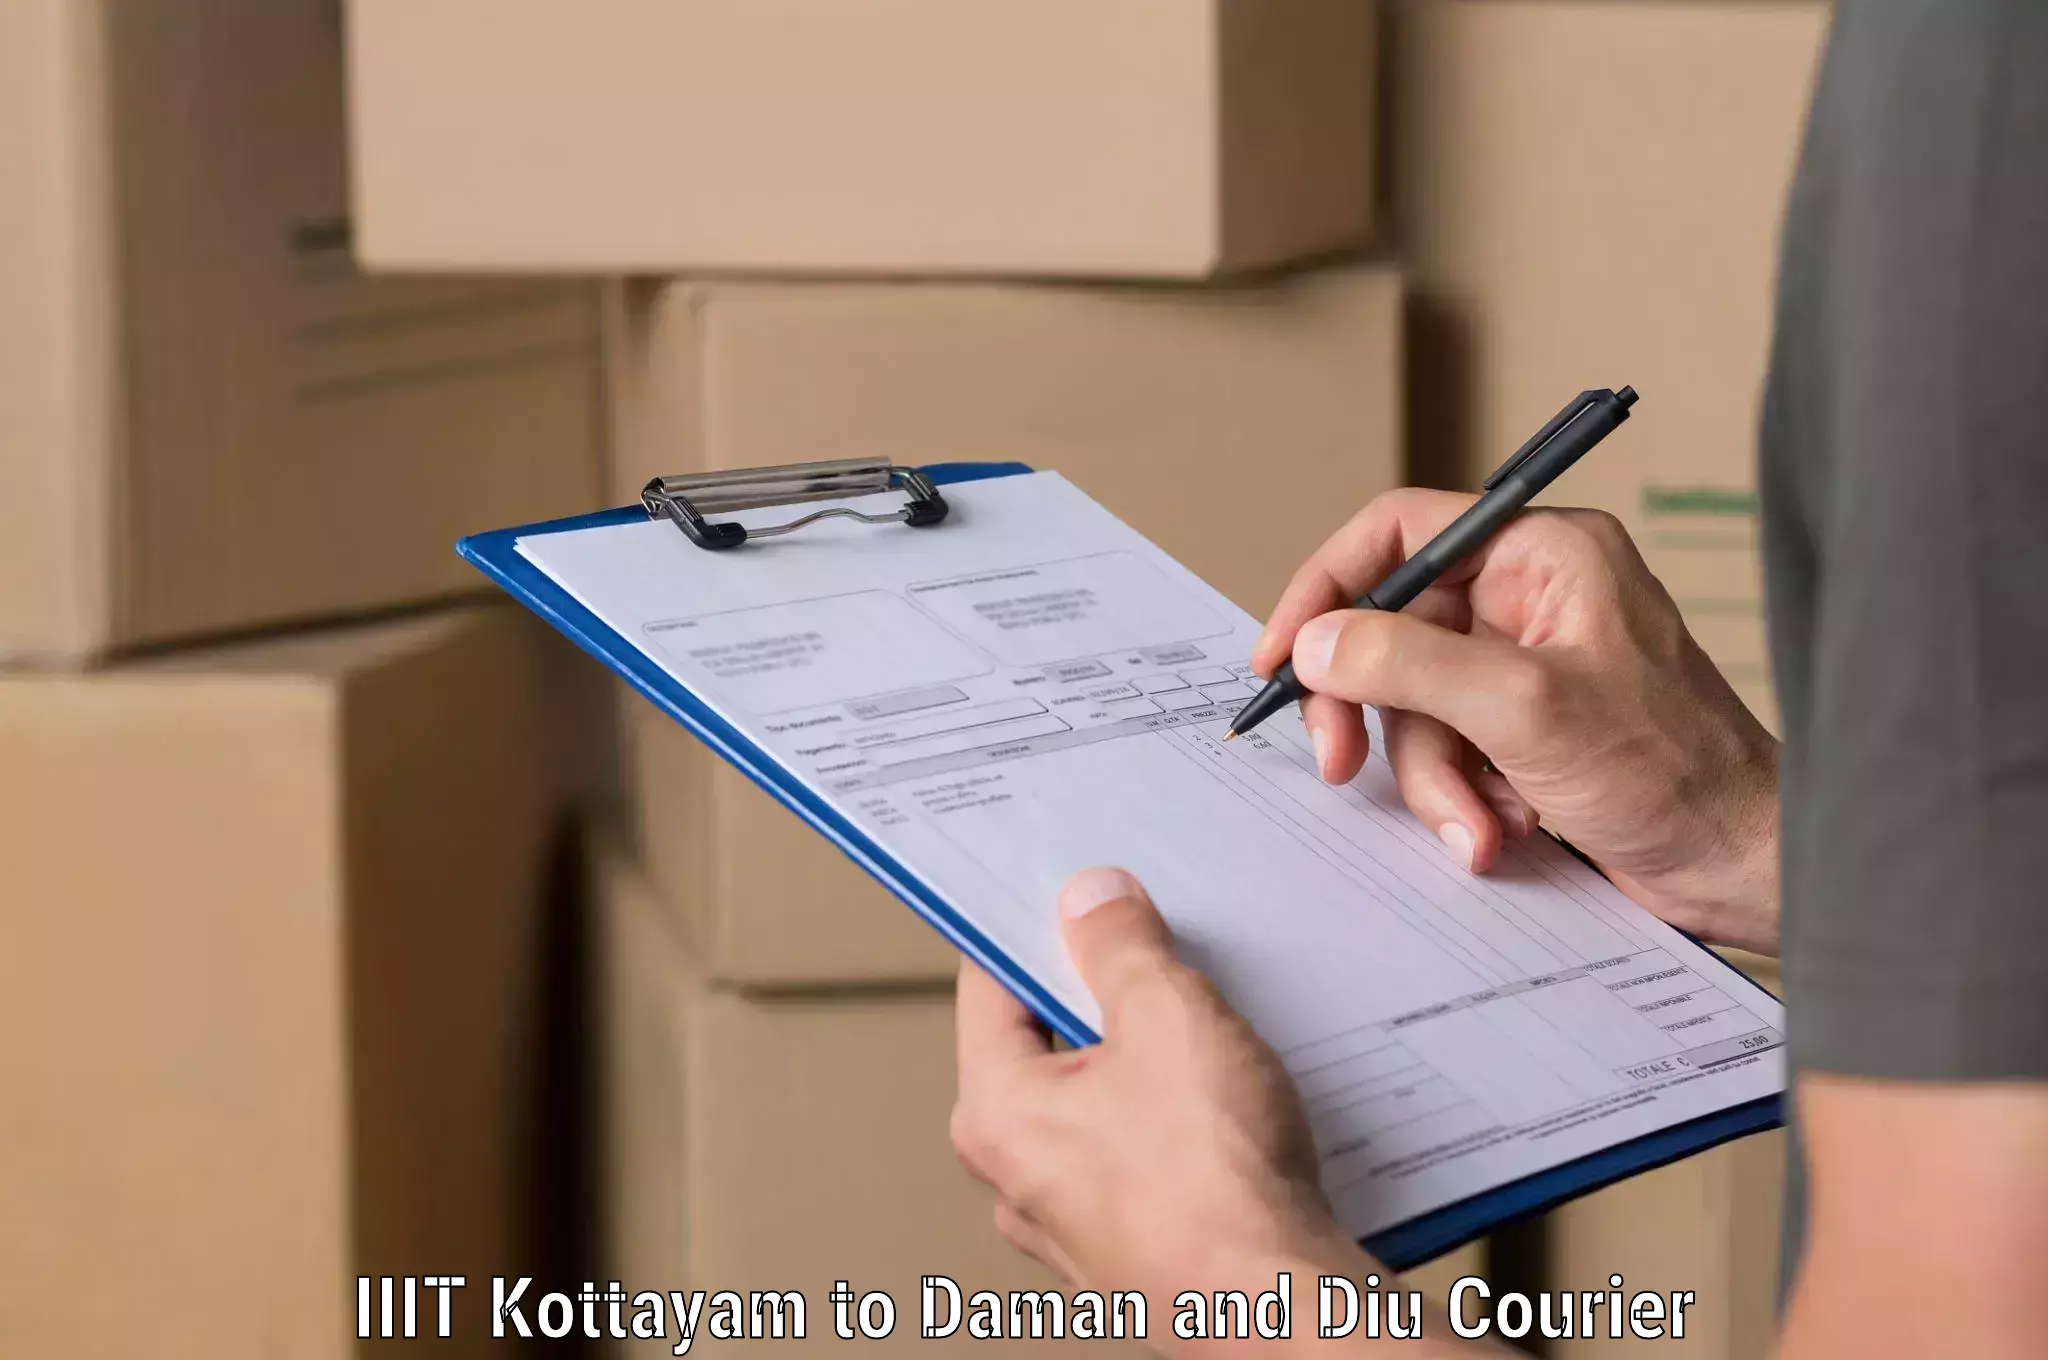 Next-day delivery options IIIT Kottayam to Daman and Diu